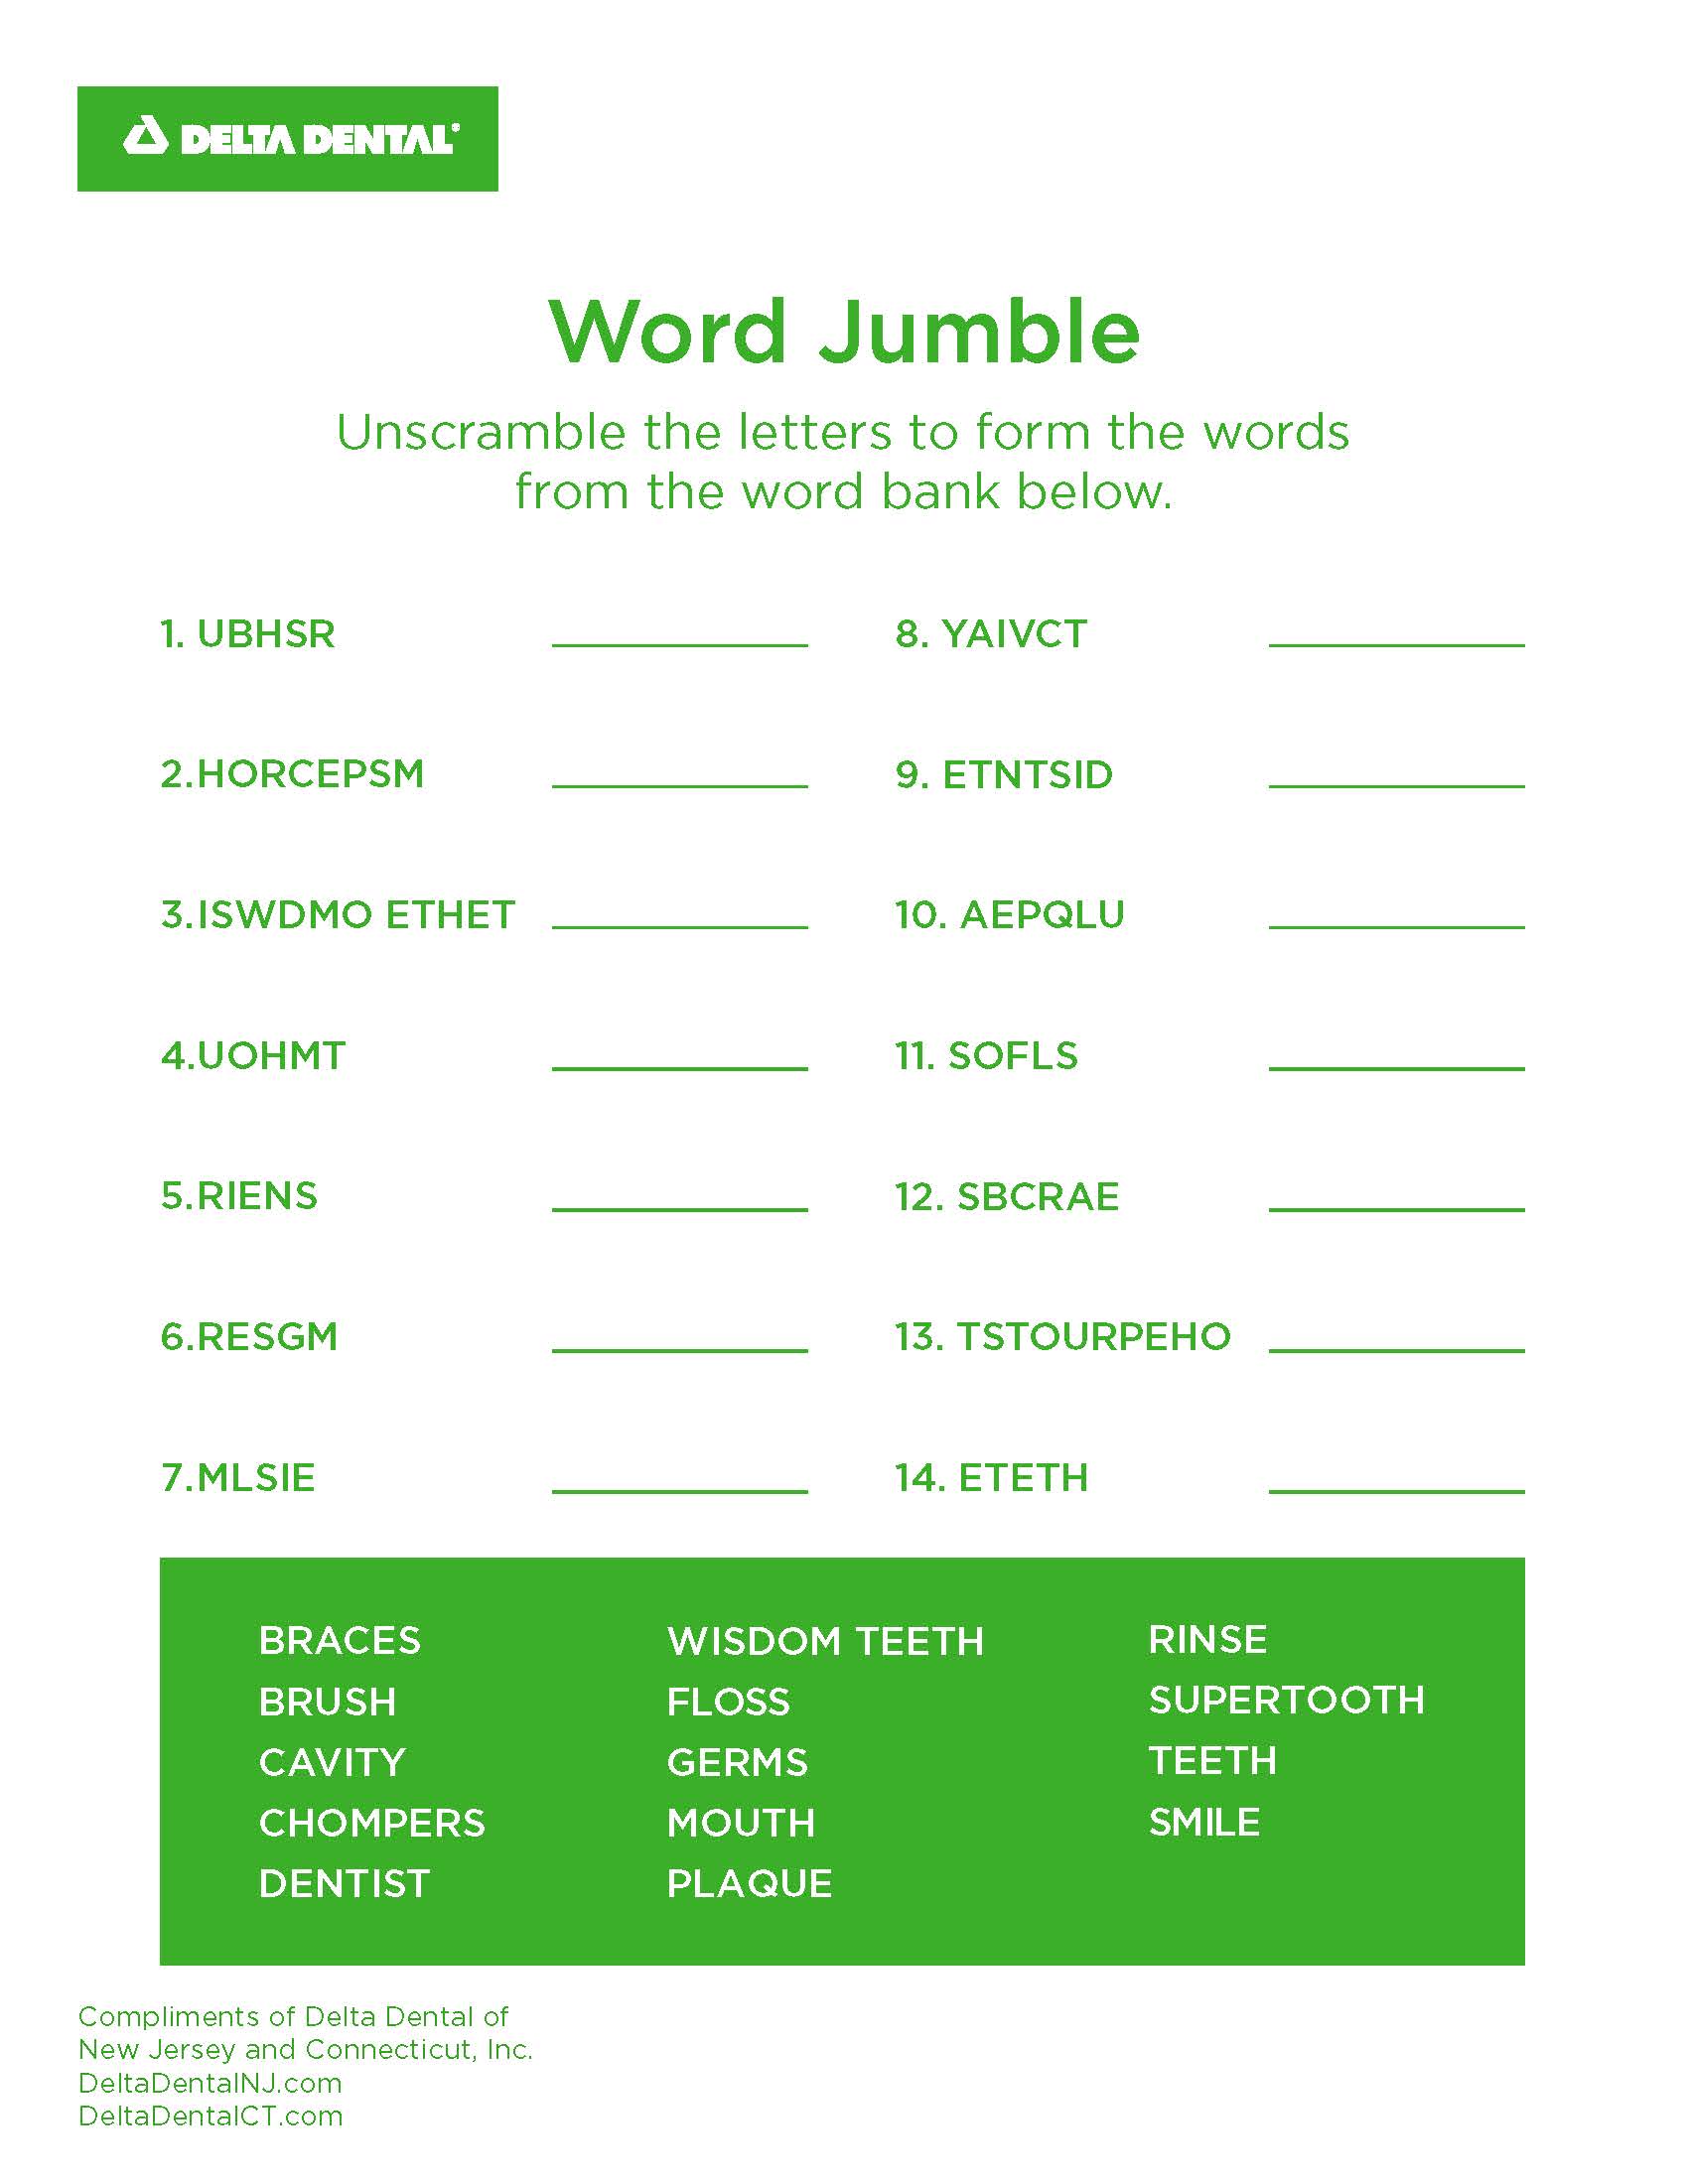 world jumble with captain supertooth